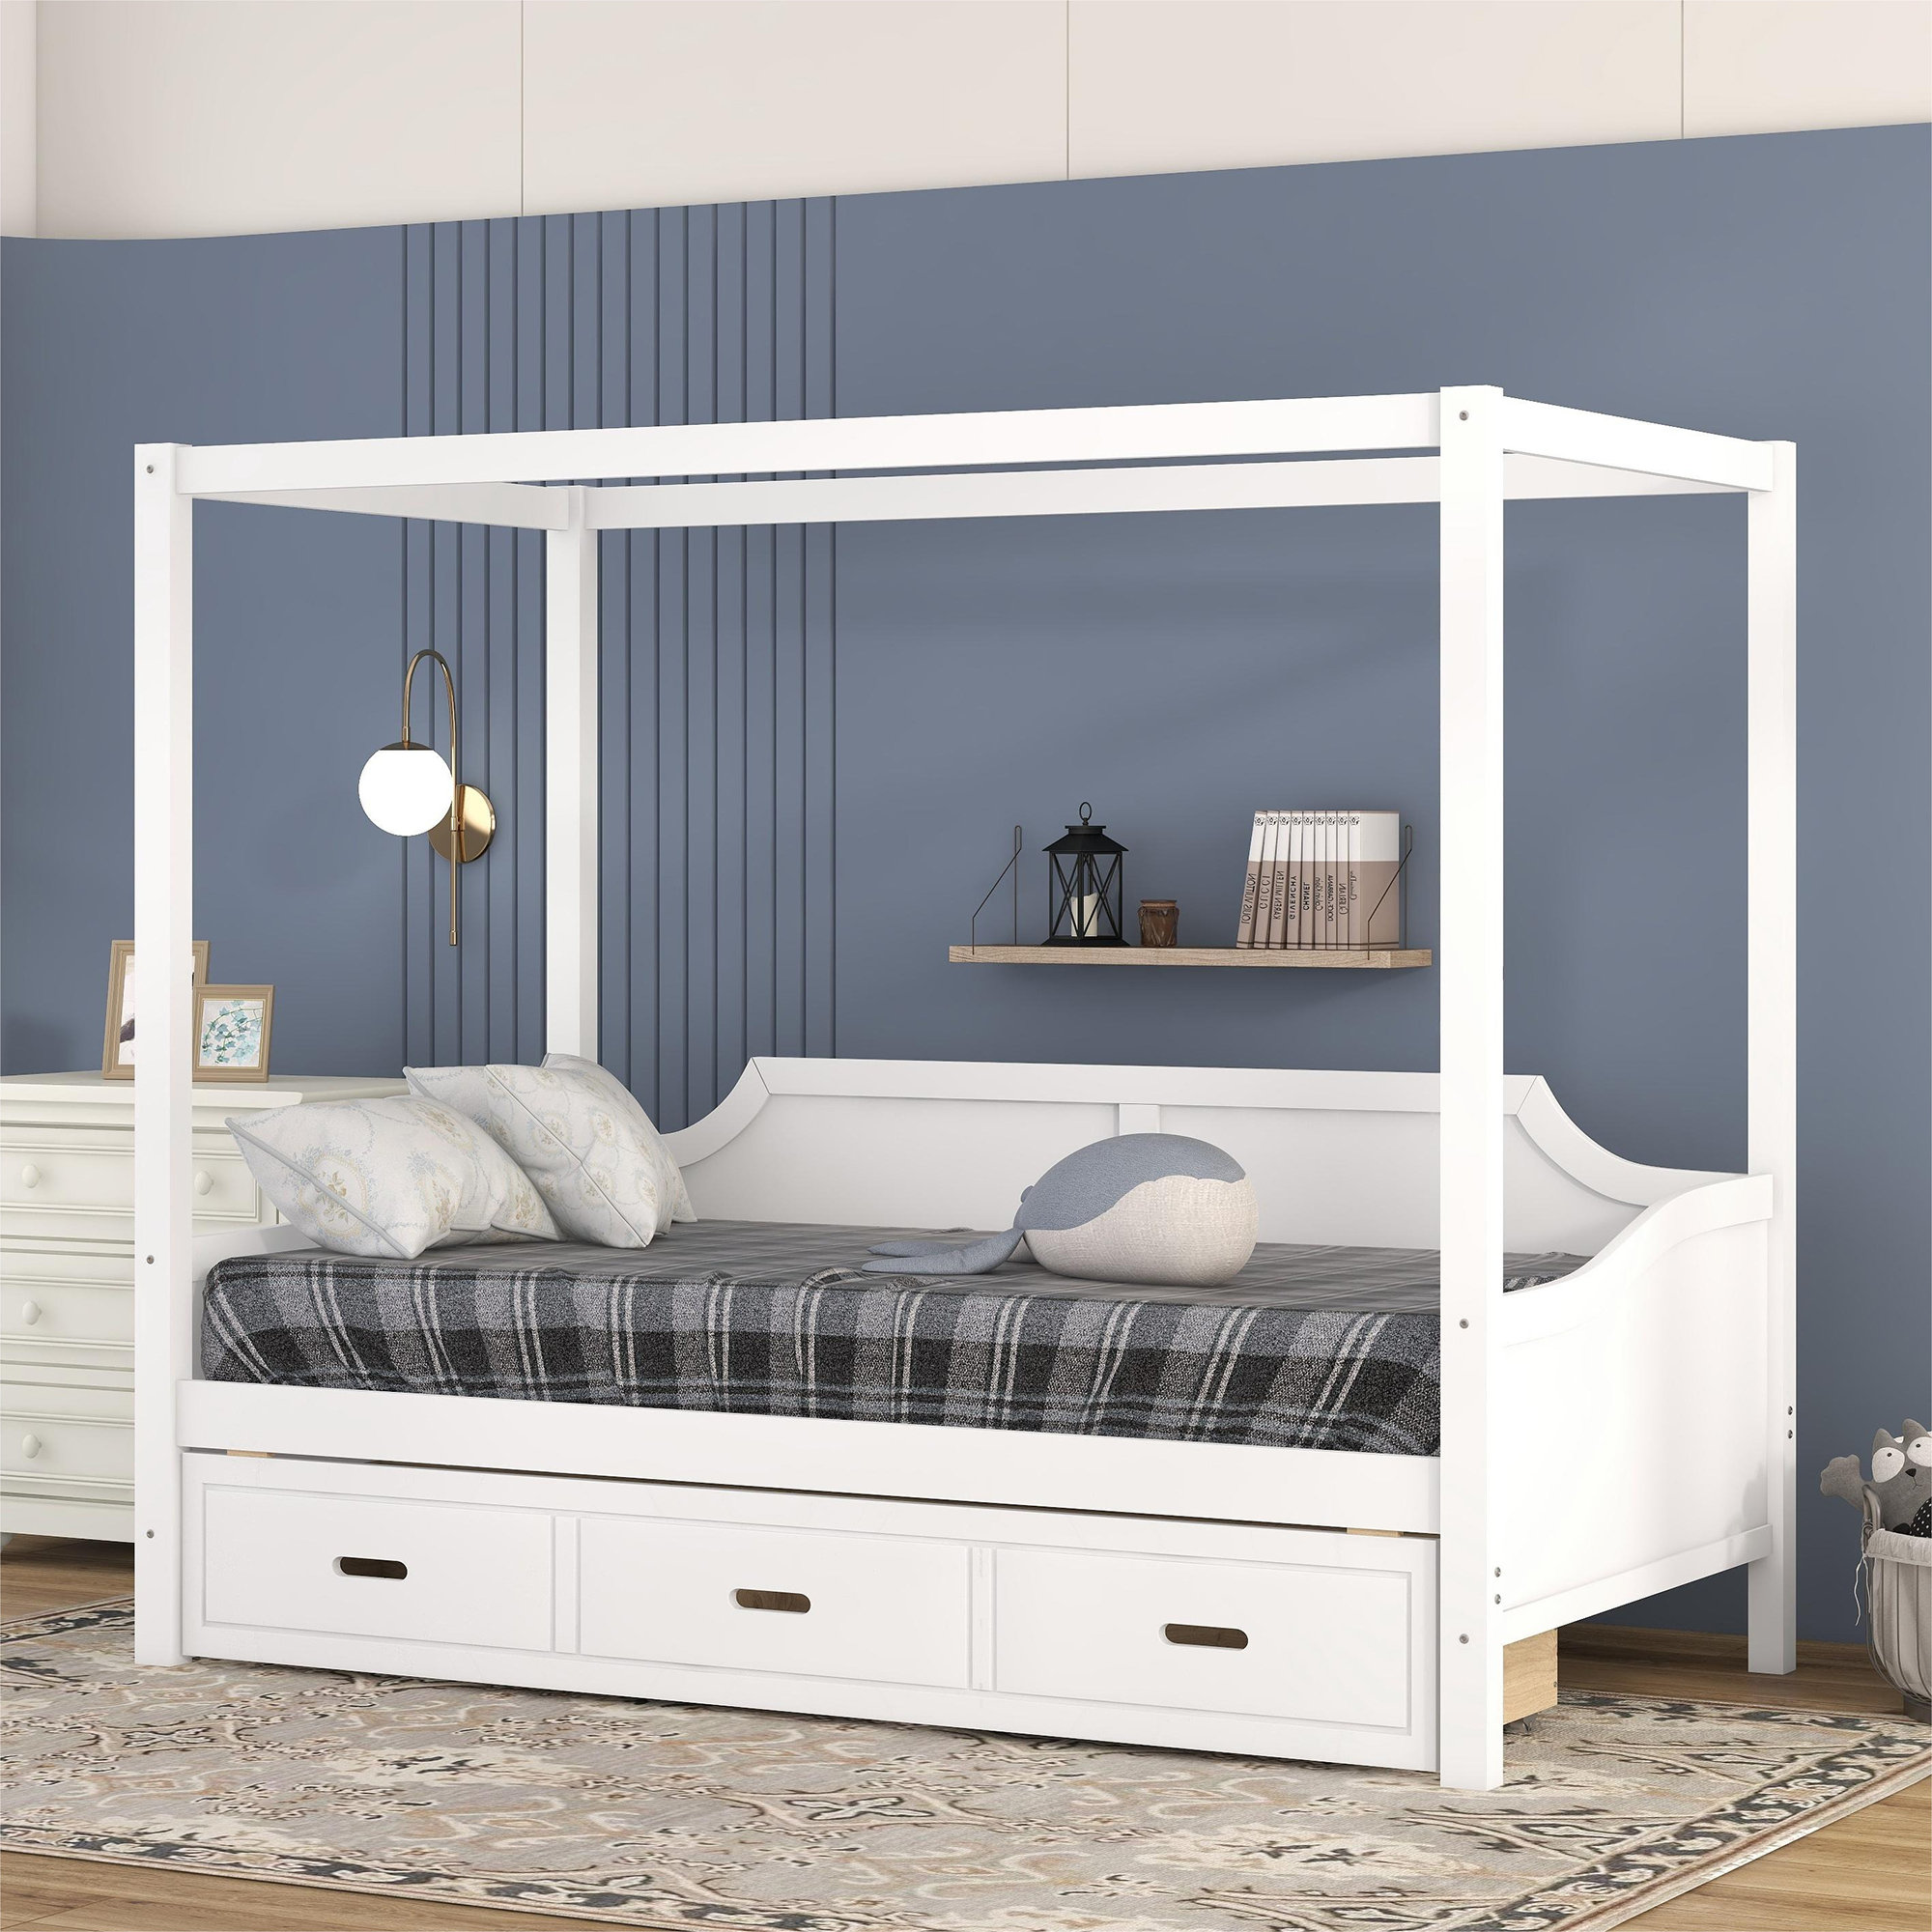 Inri Canopy Daybed with Storage